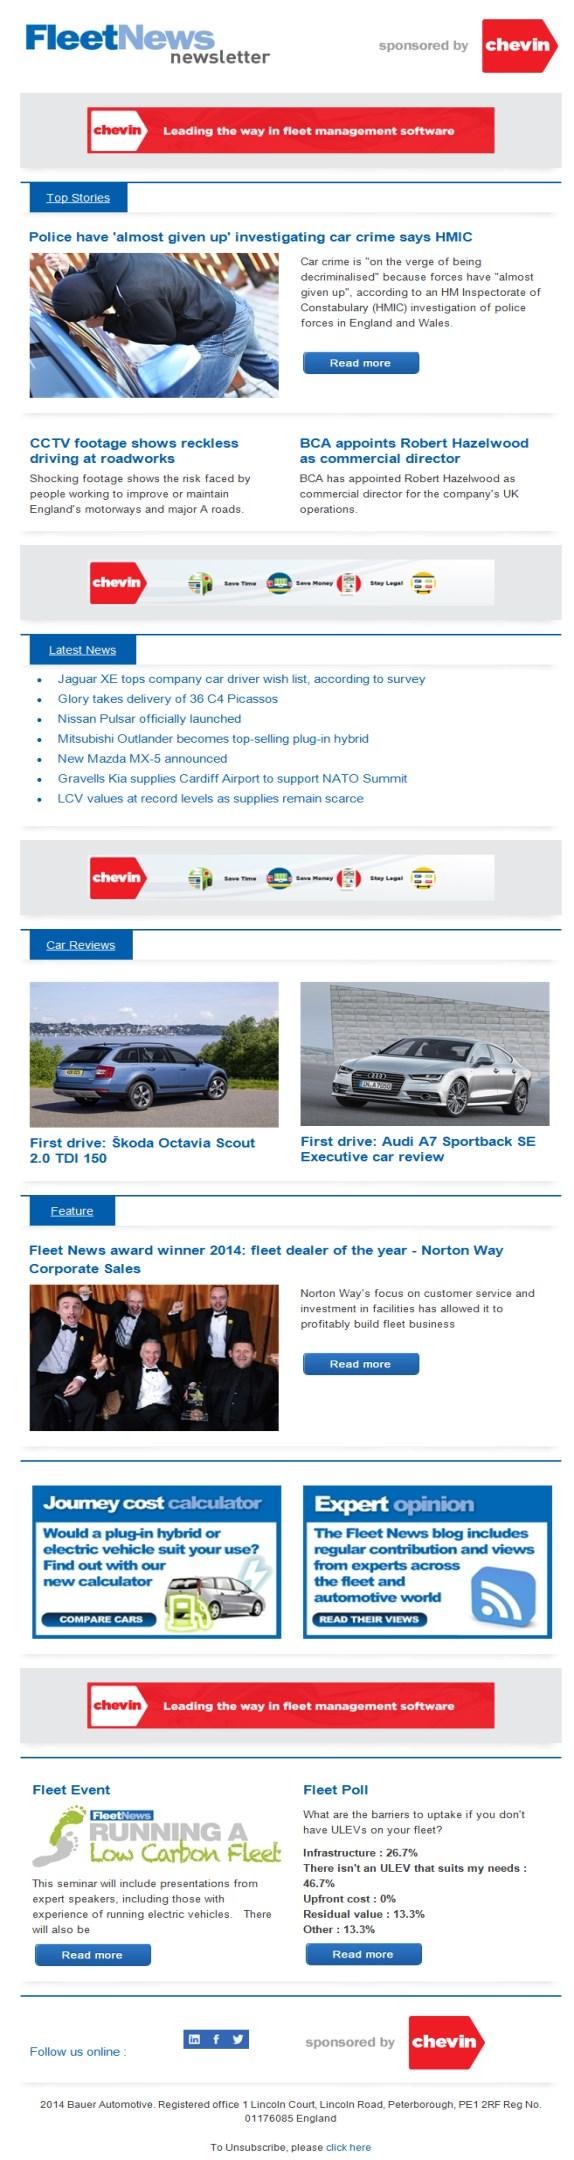 Newsletter Sponsorship Gain maximum exposure to the core fleet news online audience by sponsoring the Fleet News Newsletter.